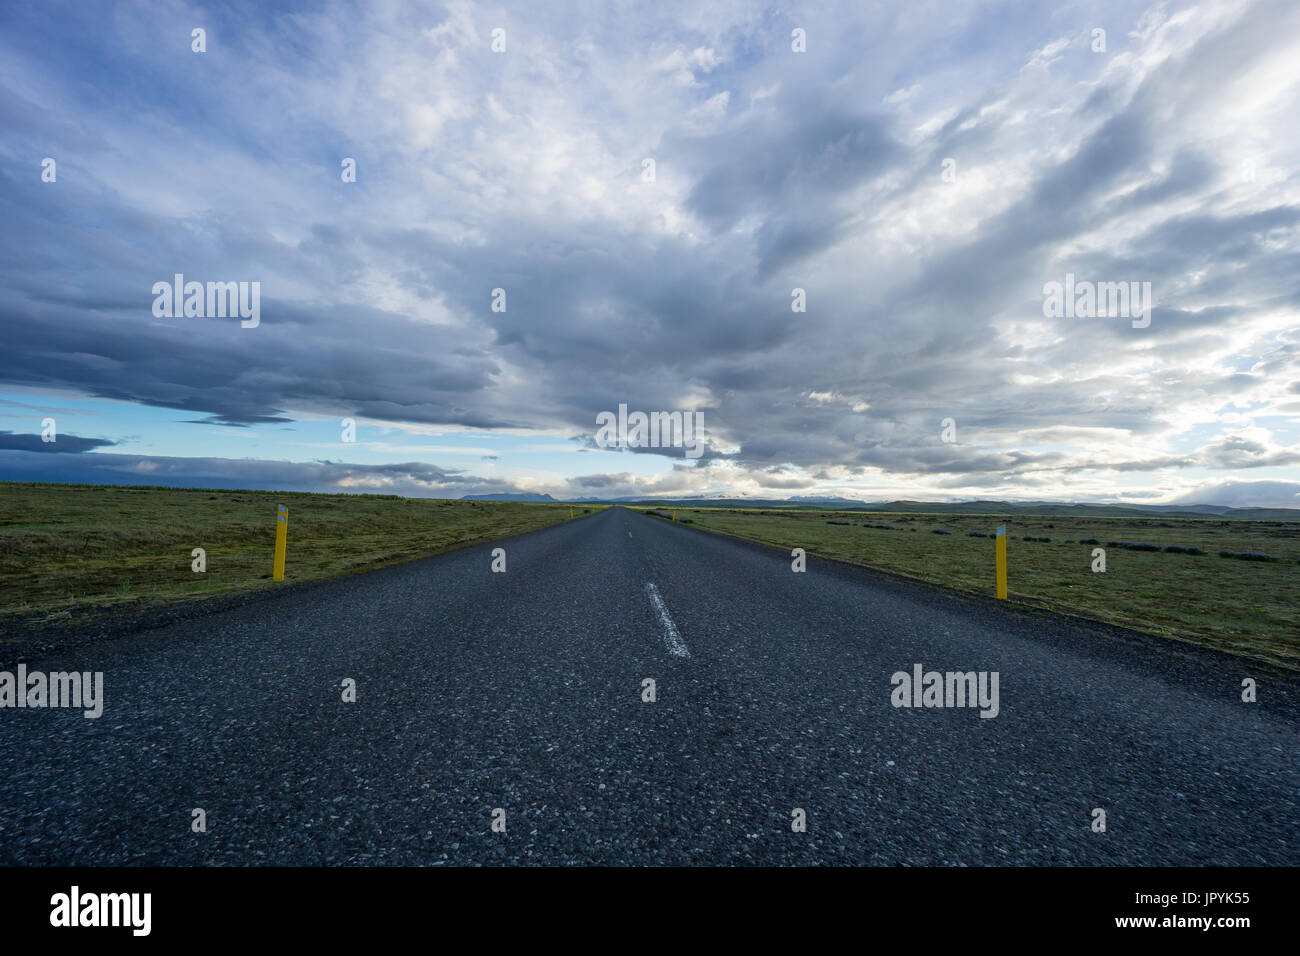 Iceland - Bolt upright street between wide green land and mountains Stock Photo